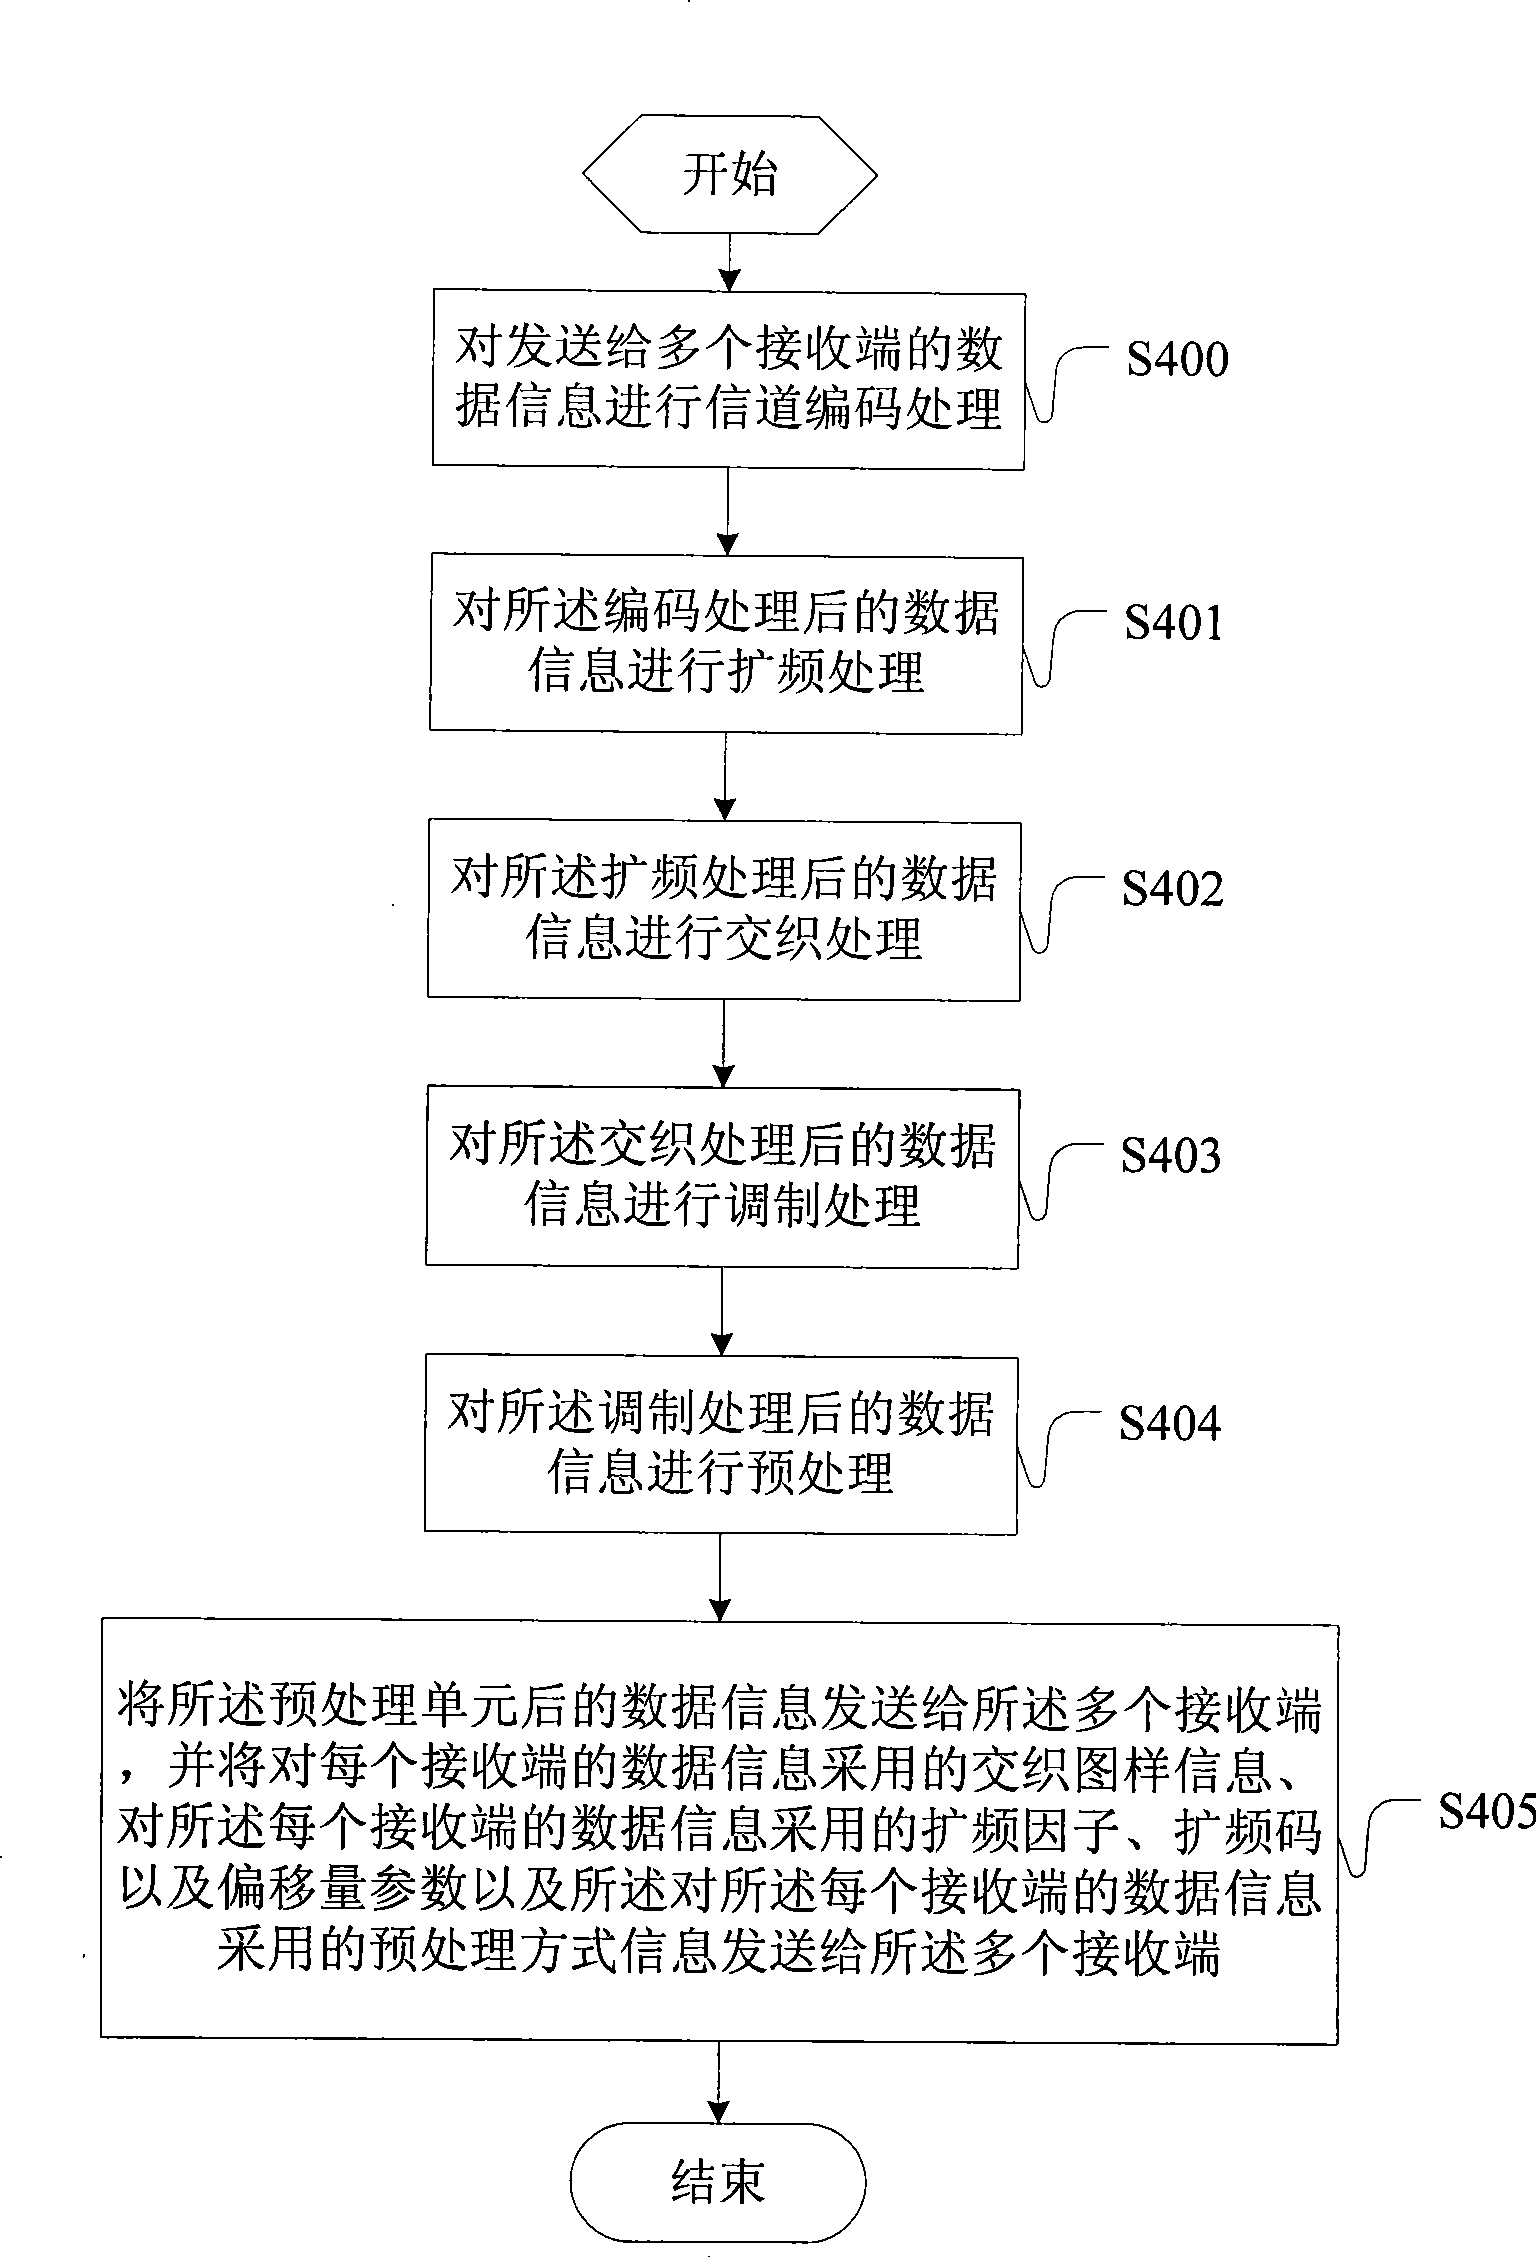 Method and apparatus for sending and receiving multi-aerial system data